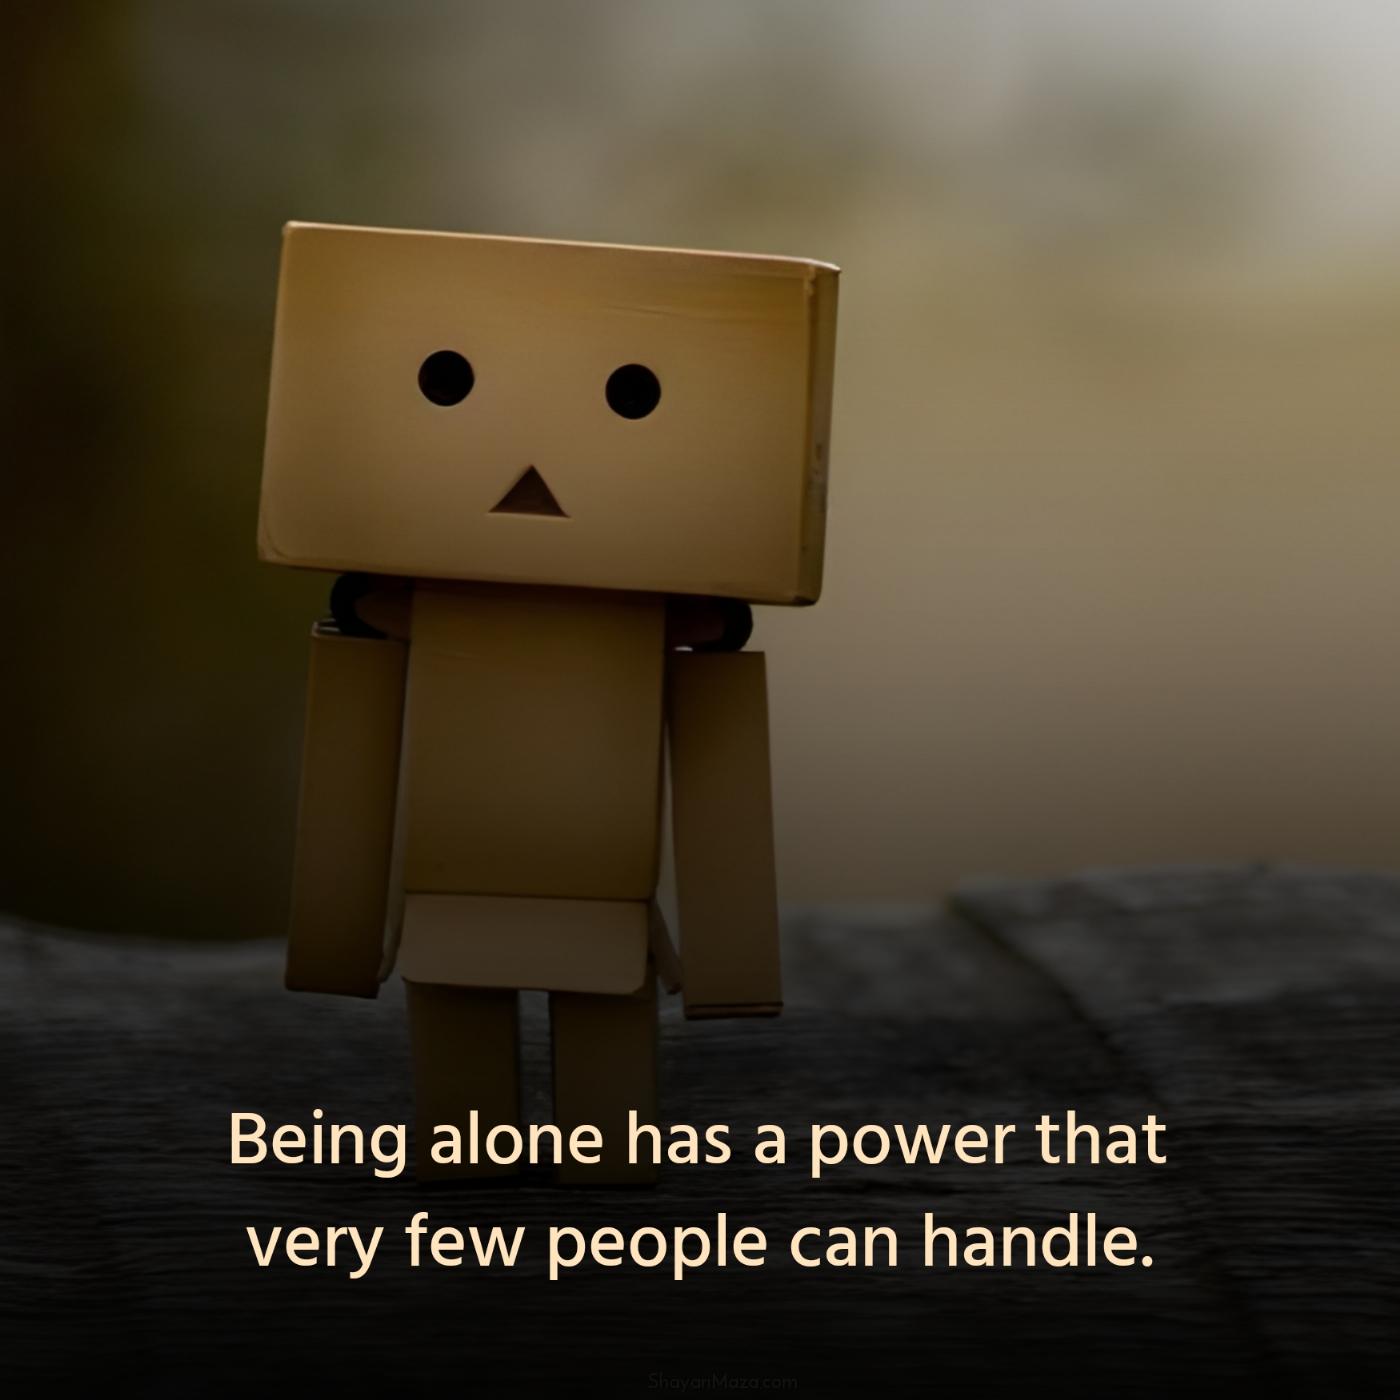 Being alone has a power that very few people can handle